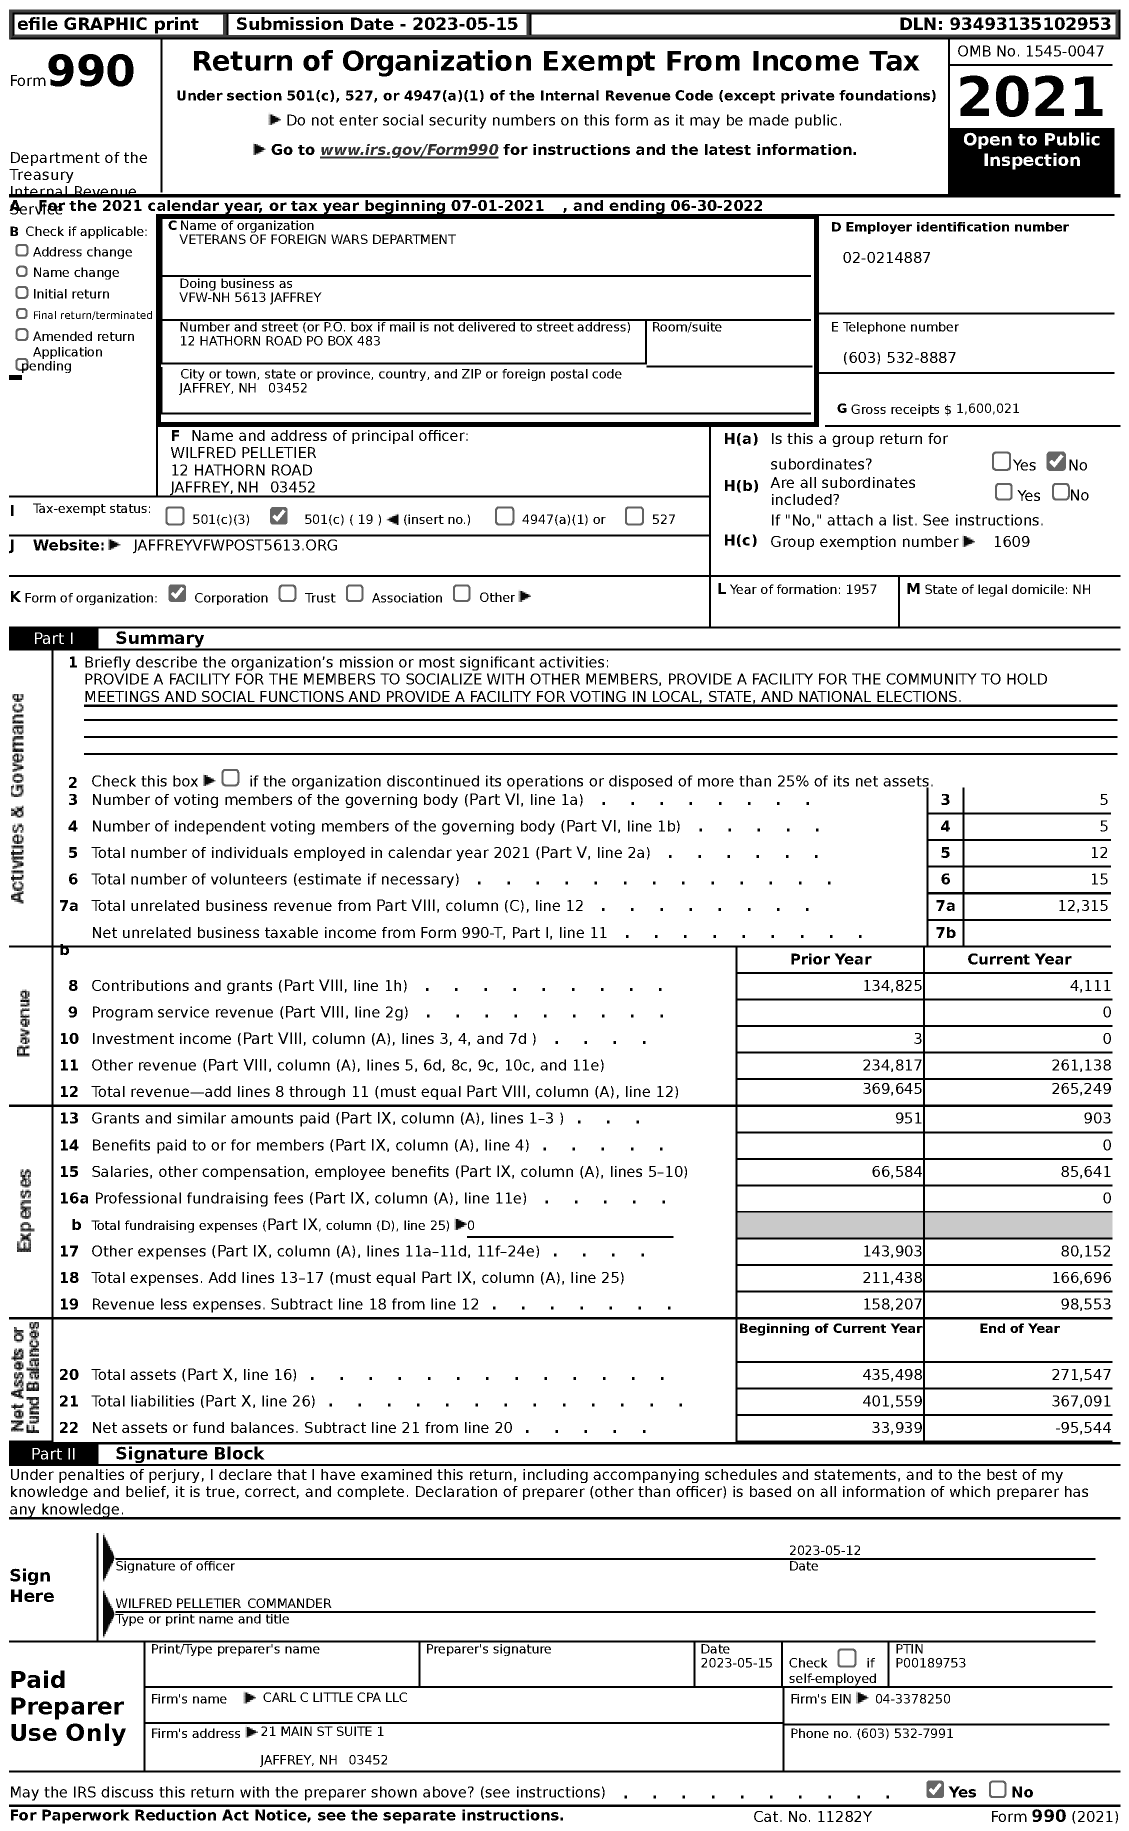 Image of first page of 2021 Form 990 for Veterans of Foreign Wars Department - VFW-NH 5613 Jaffrey